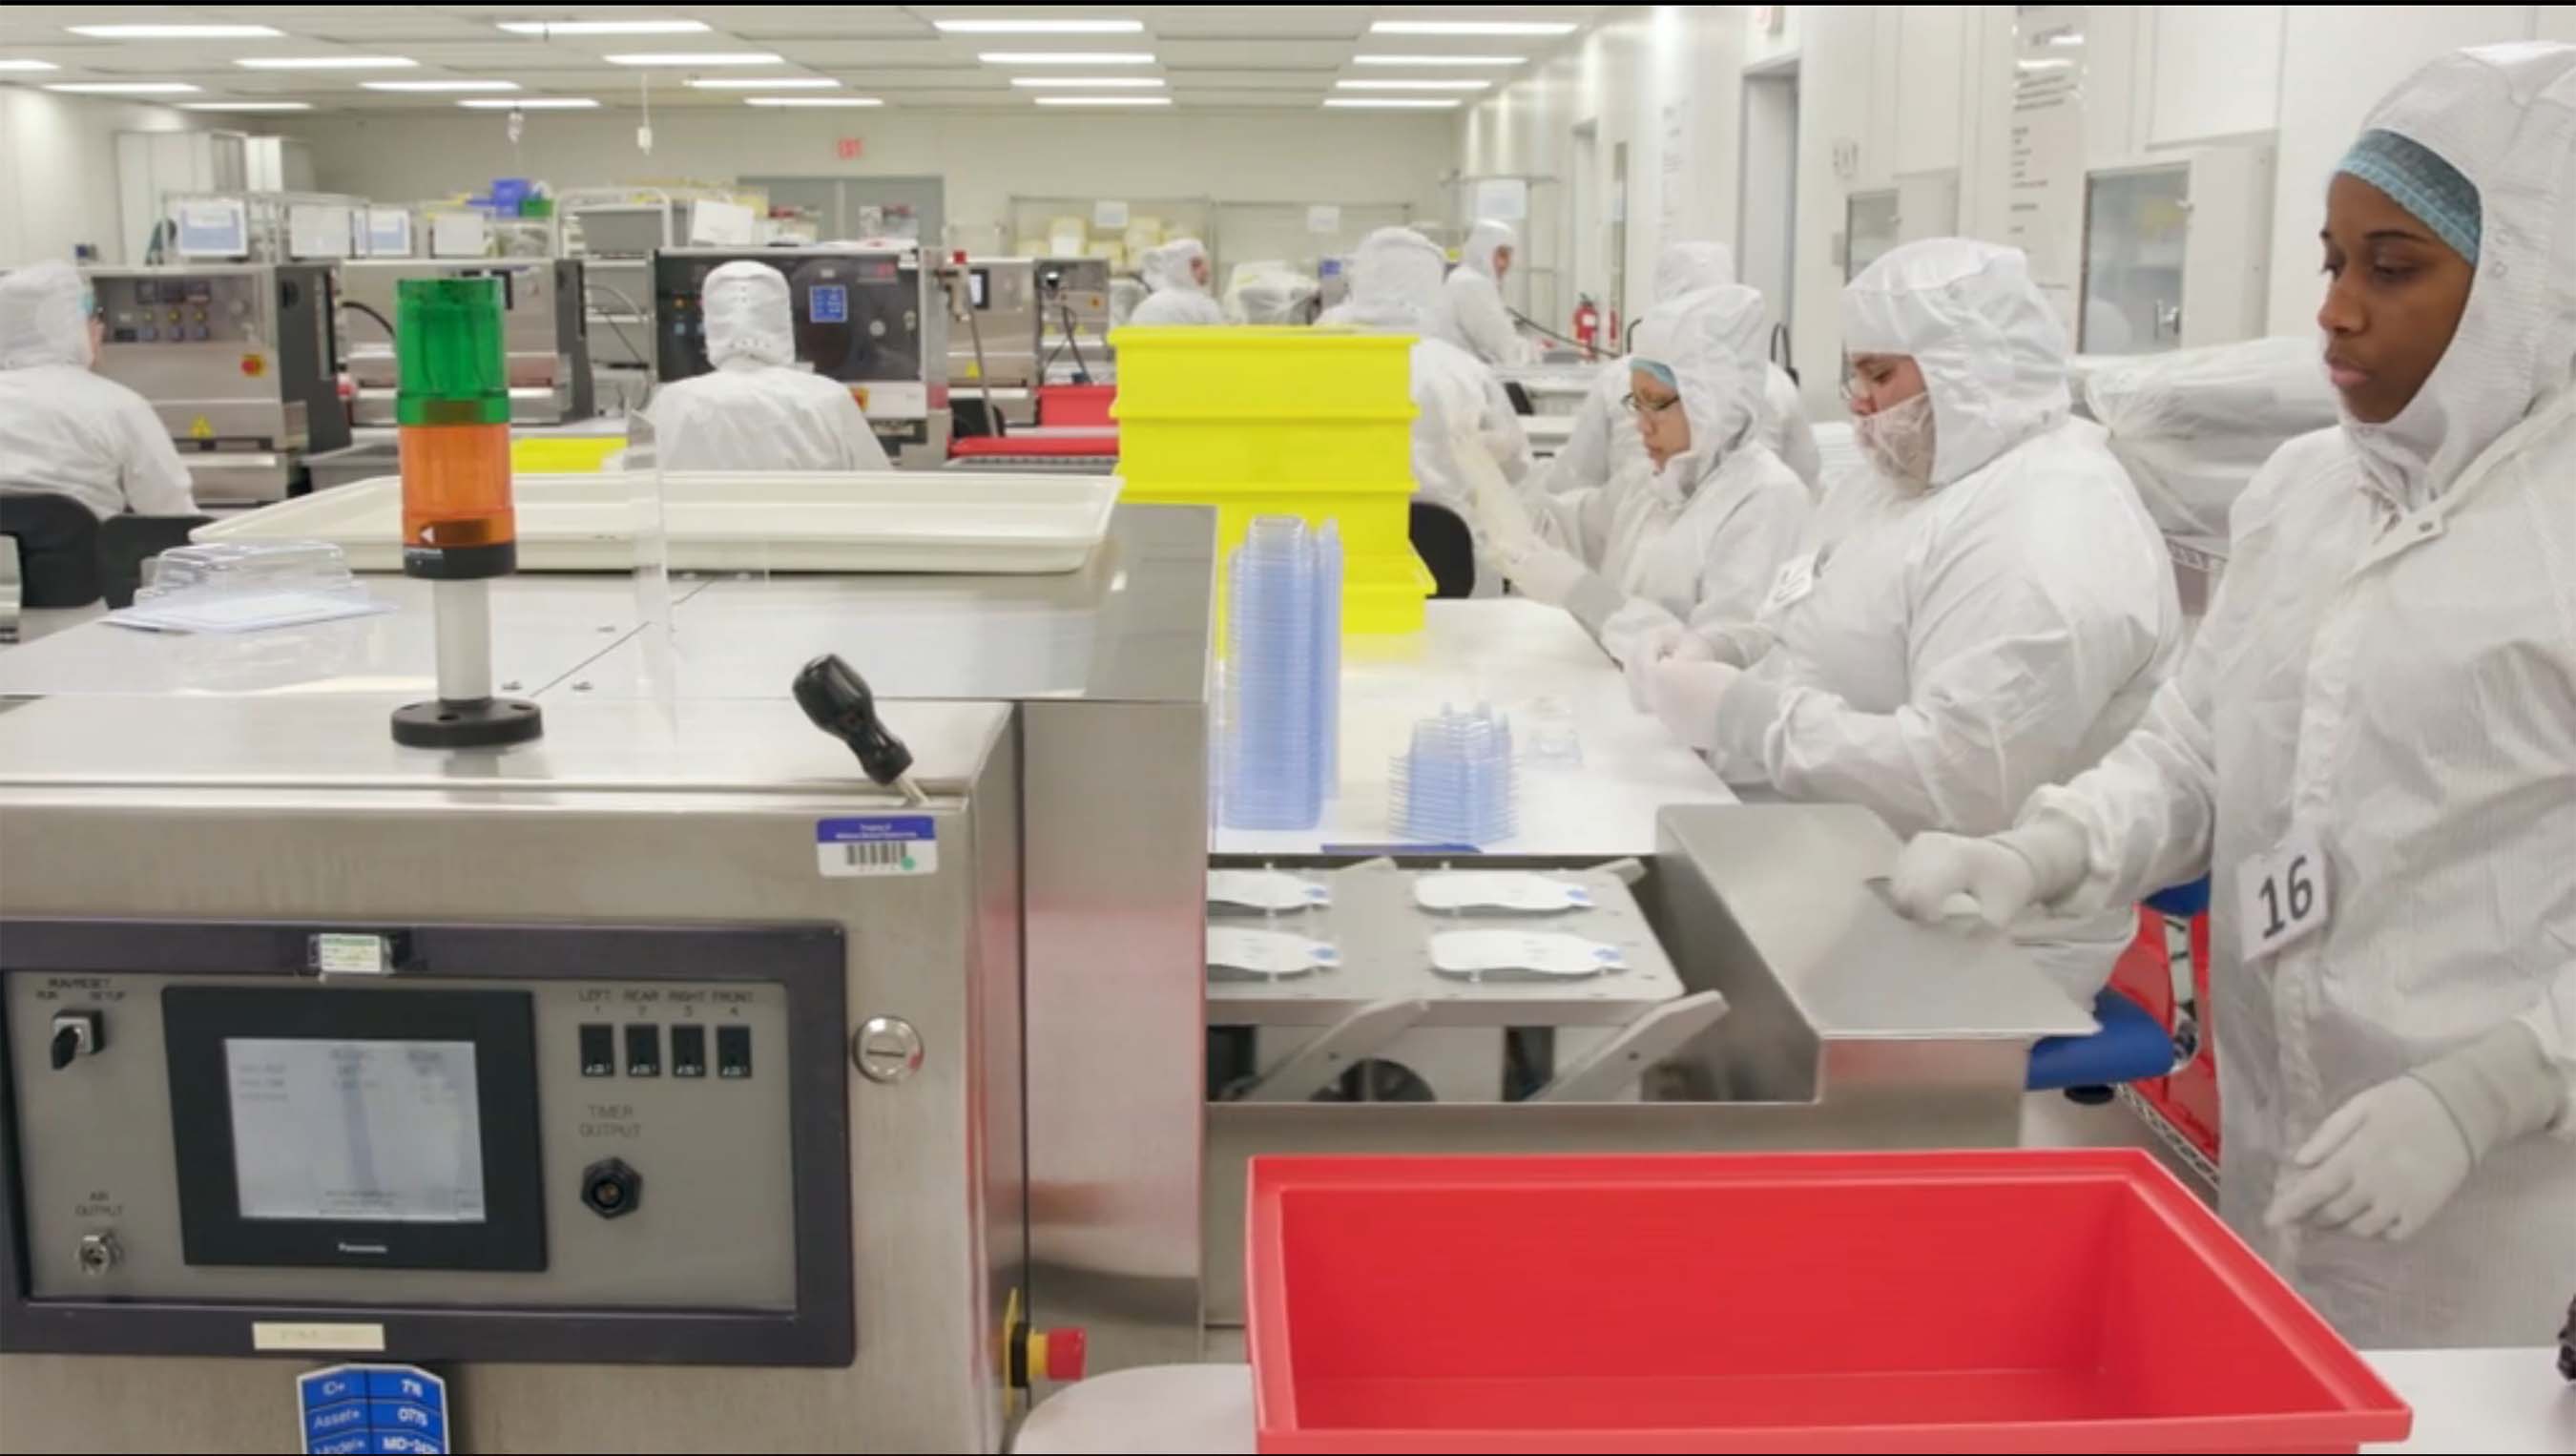 A look inside of Millstone Medical’s lab and its employees at work